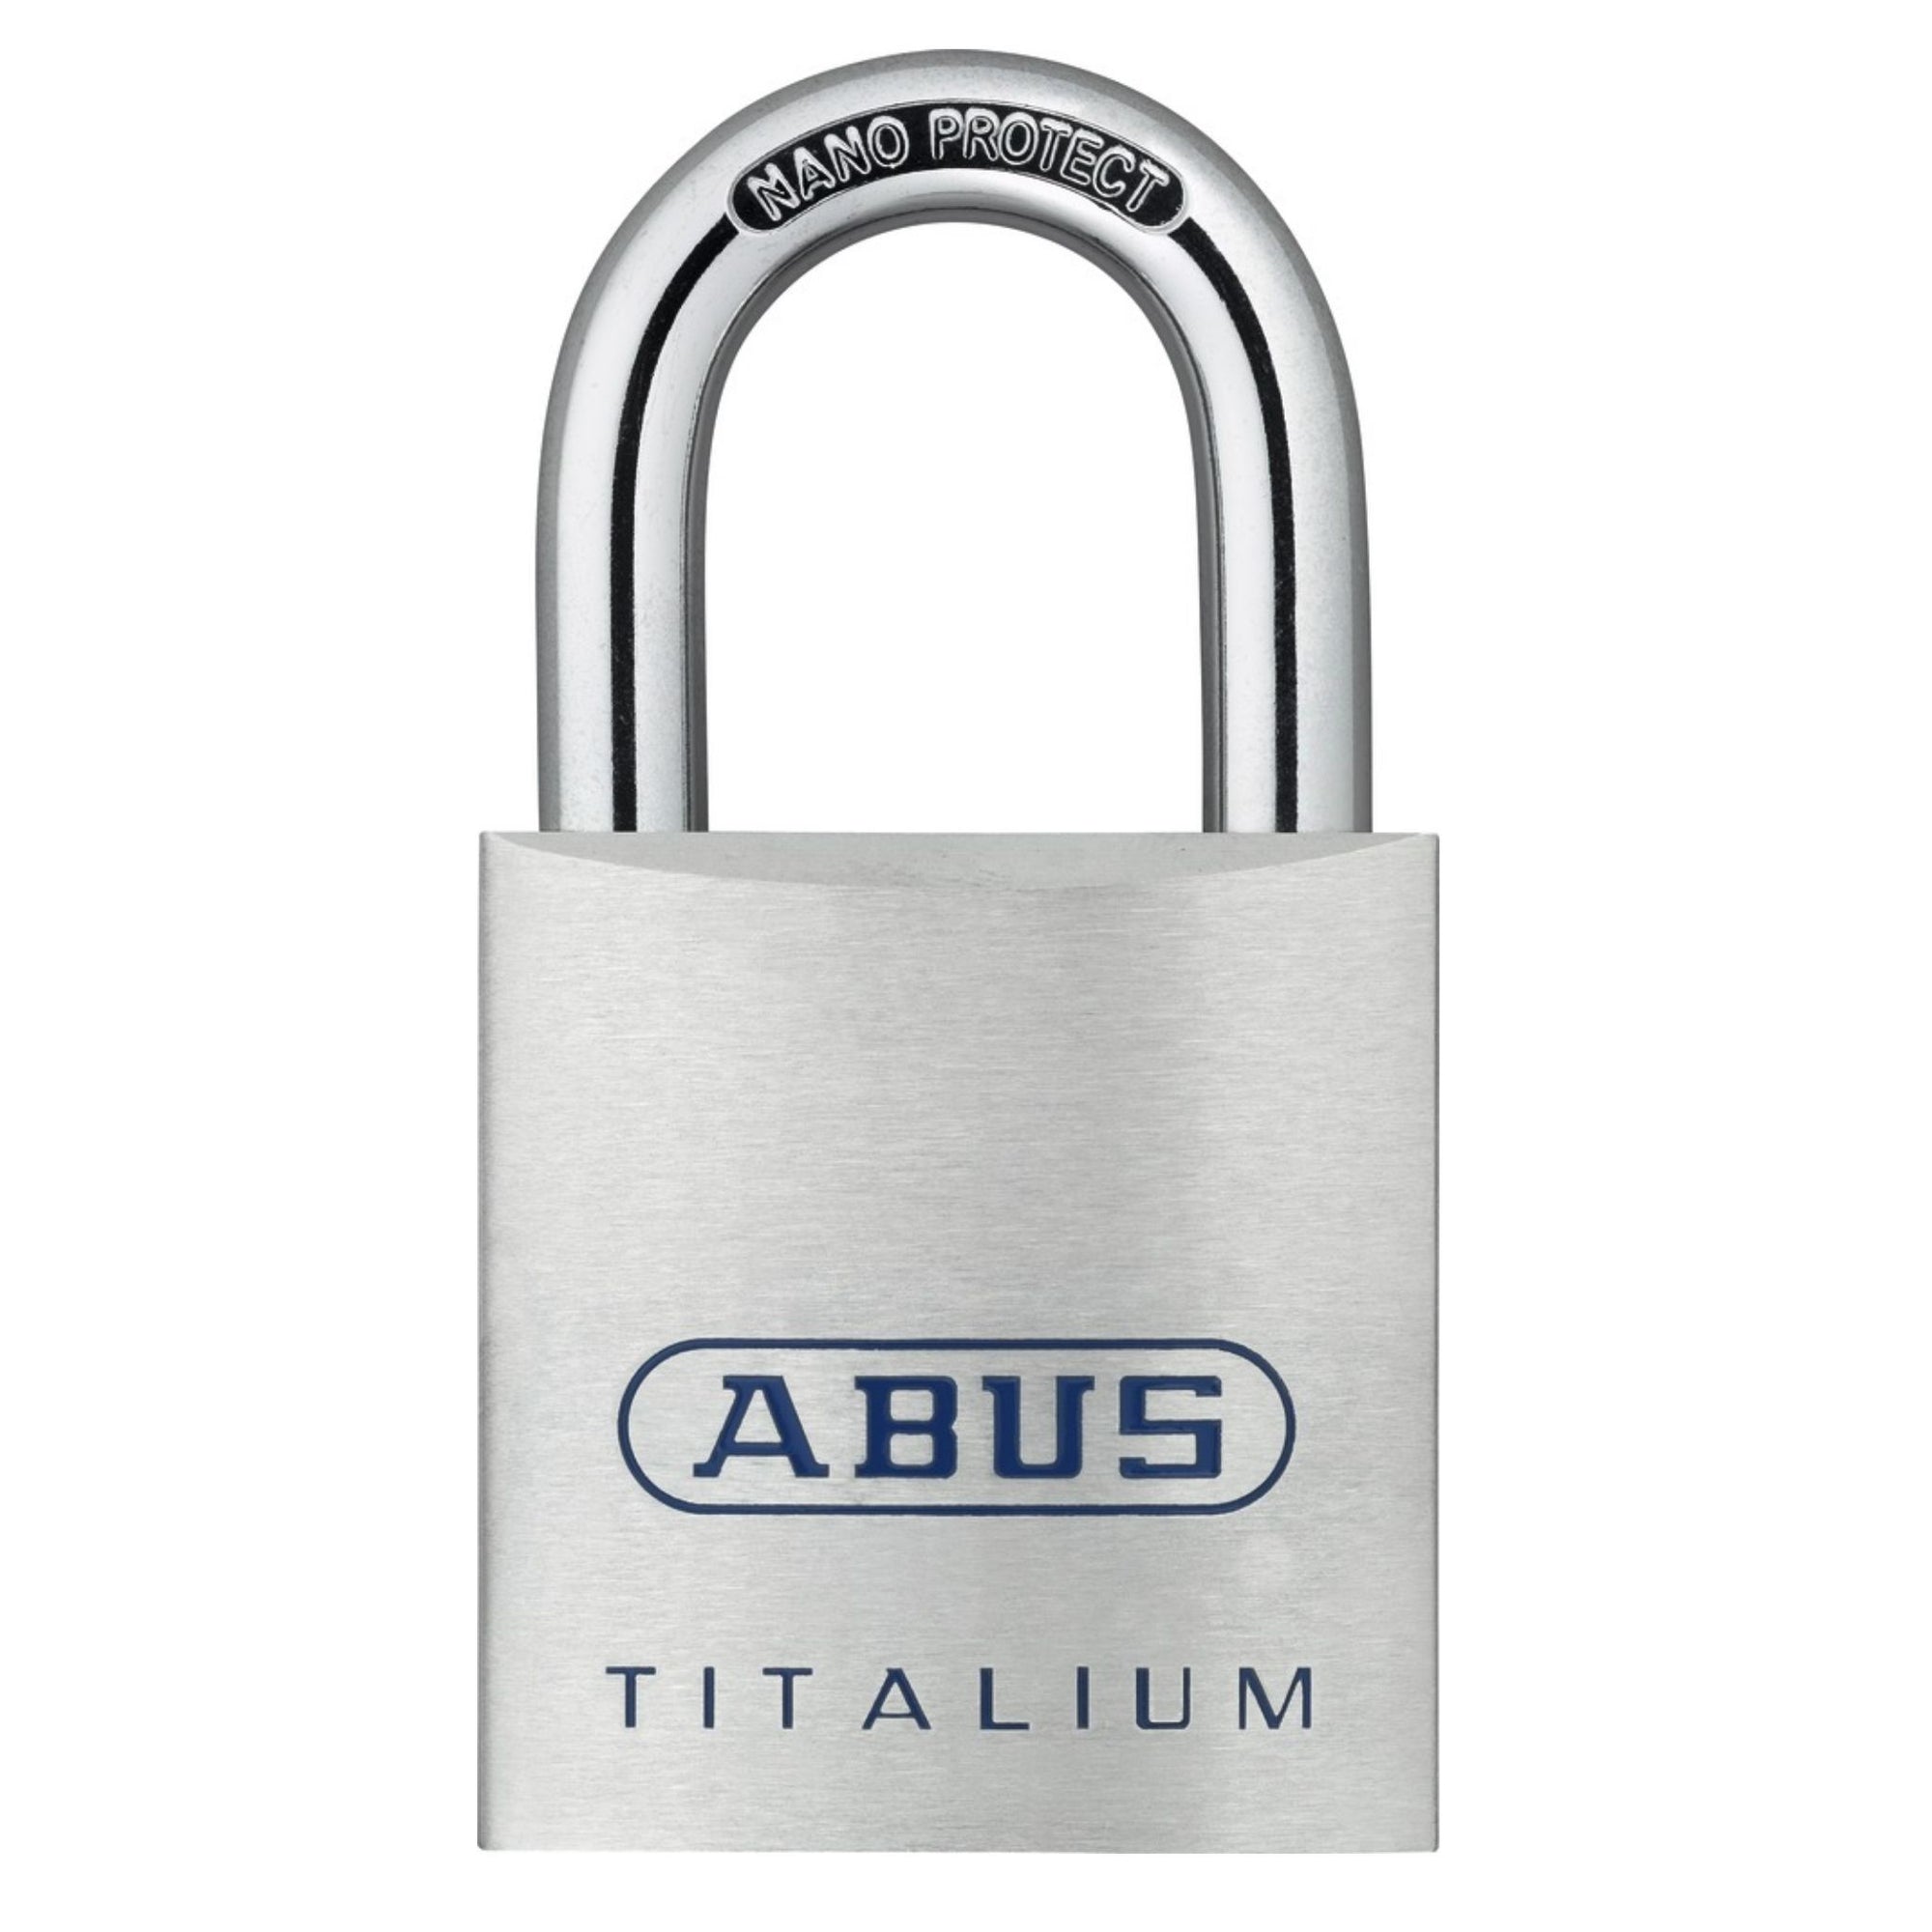 Abus 80TI/40 C KD Titalium Padlock Keyed Different (KD) Locks with 1-Inch Shackle Blister Pack for Retail Display - The Lock Source